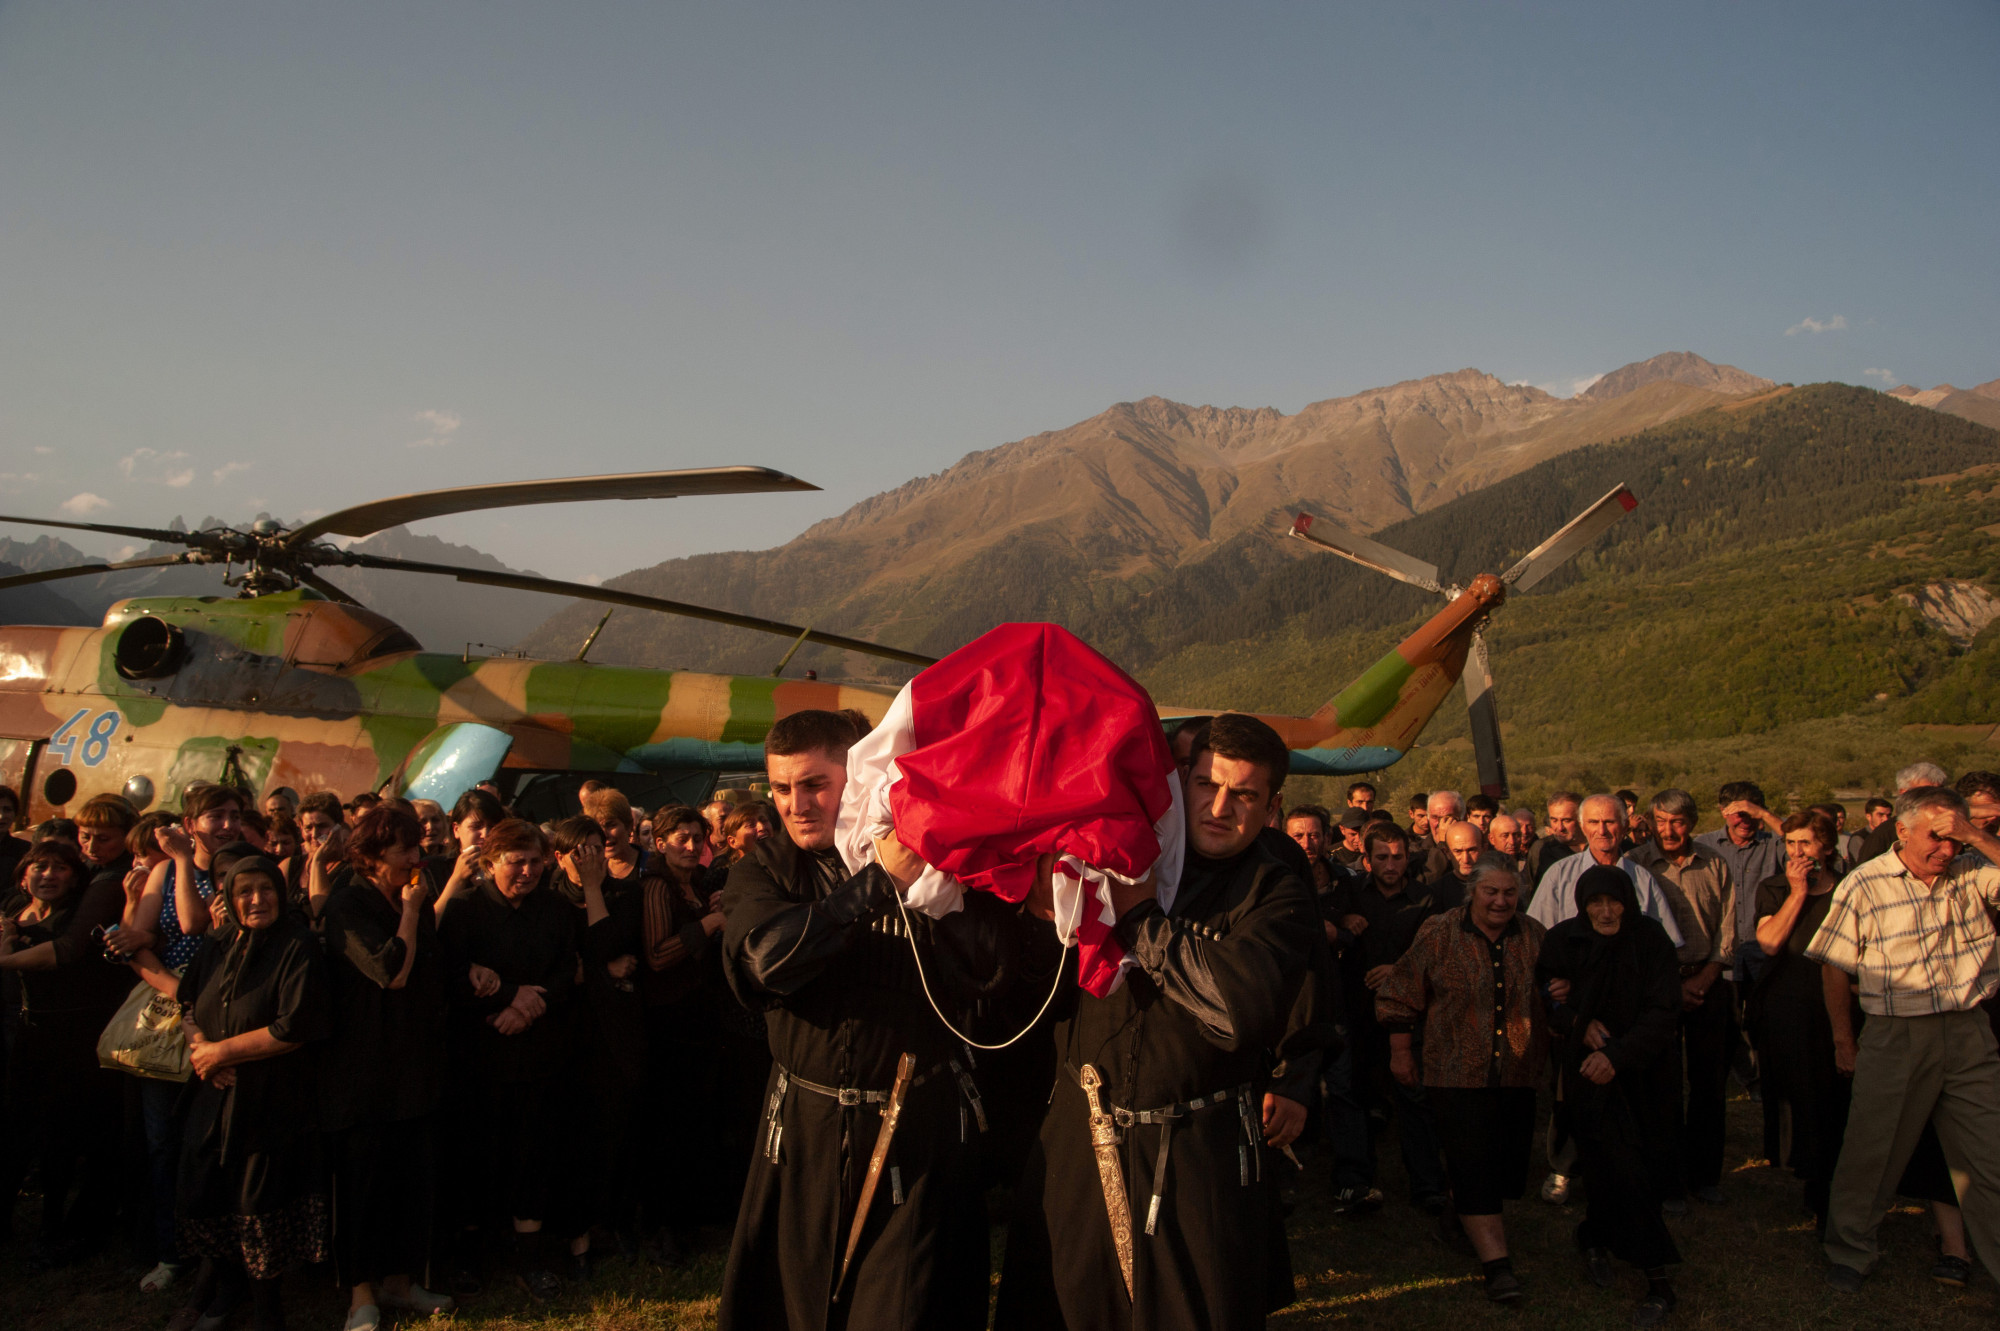 Georgia, Svanetia, Mestia, 2010/9. Funeral of the first Georgian soldier, 1st LT M.Shukvani, killed in combat in Afghanistan in his home village. © Thomas Dworzak/Magnum Photos